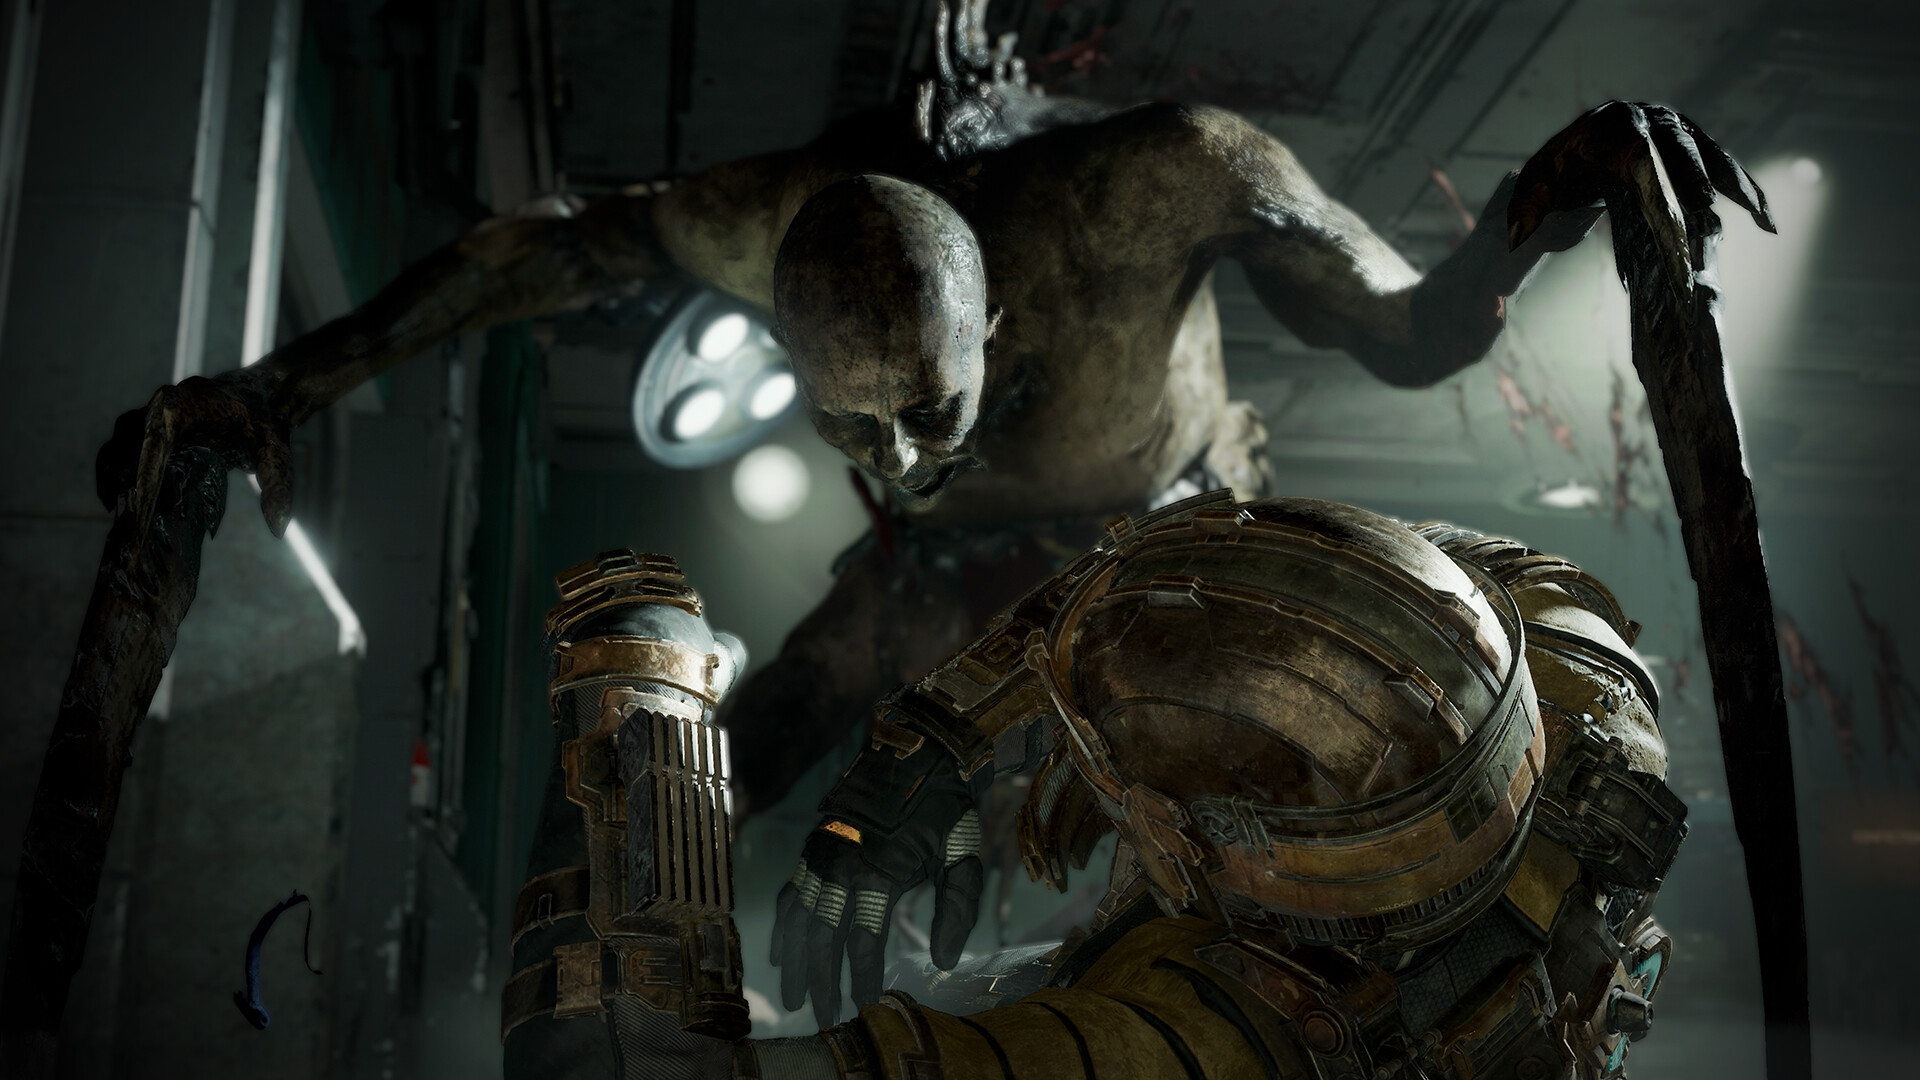 Dead Space remake pre-orders give you Dead Space 2 free on Steam